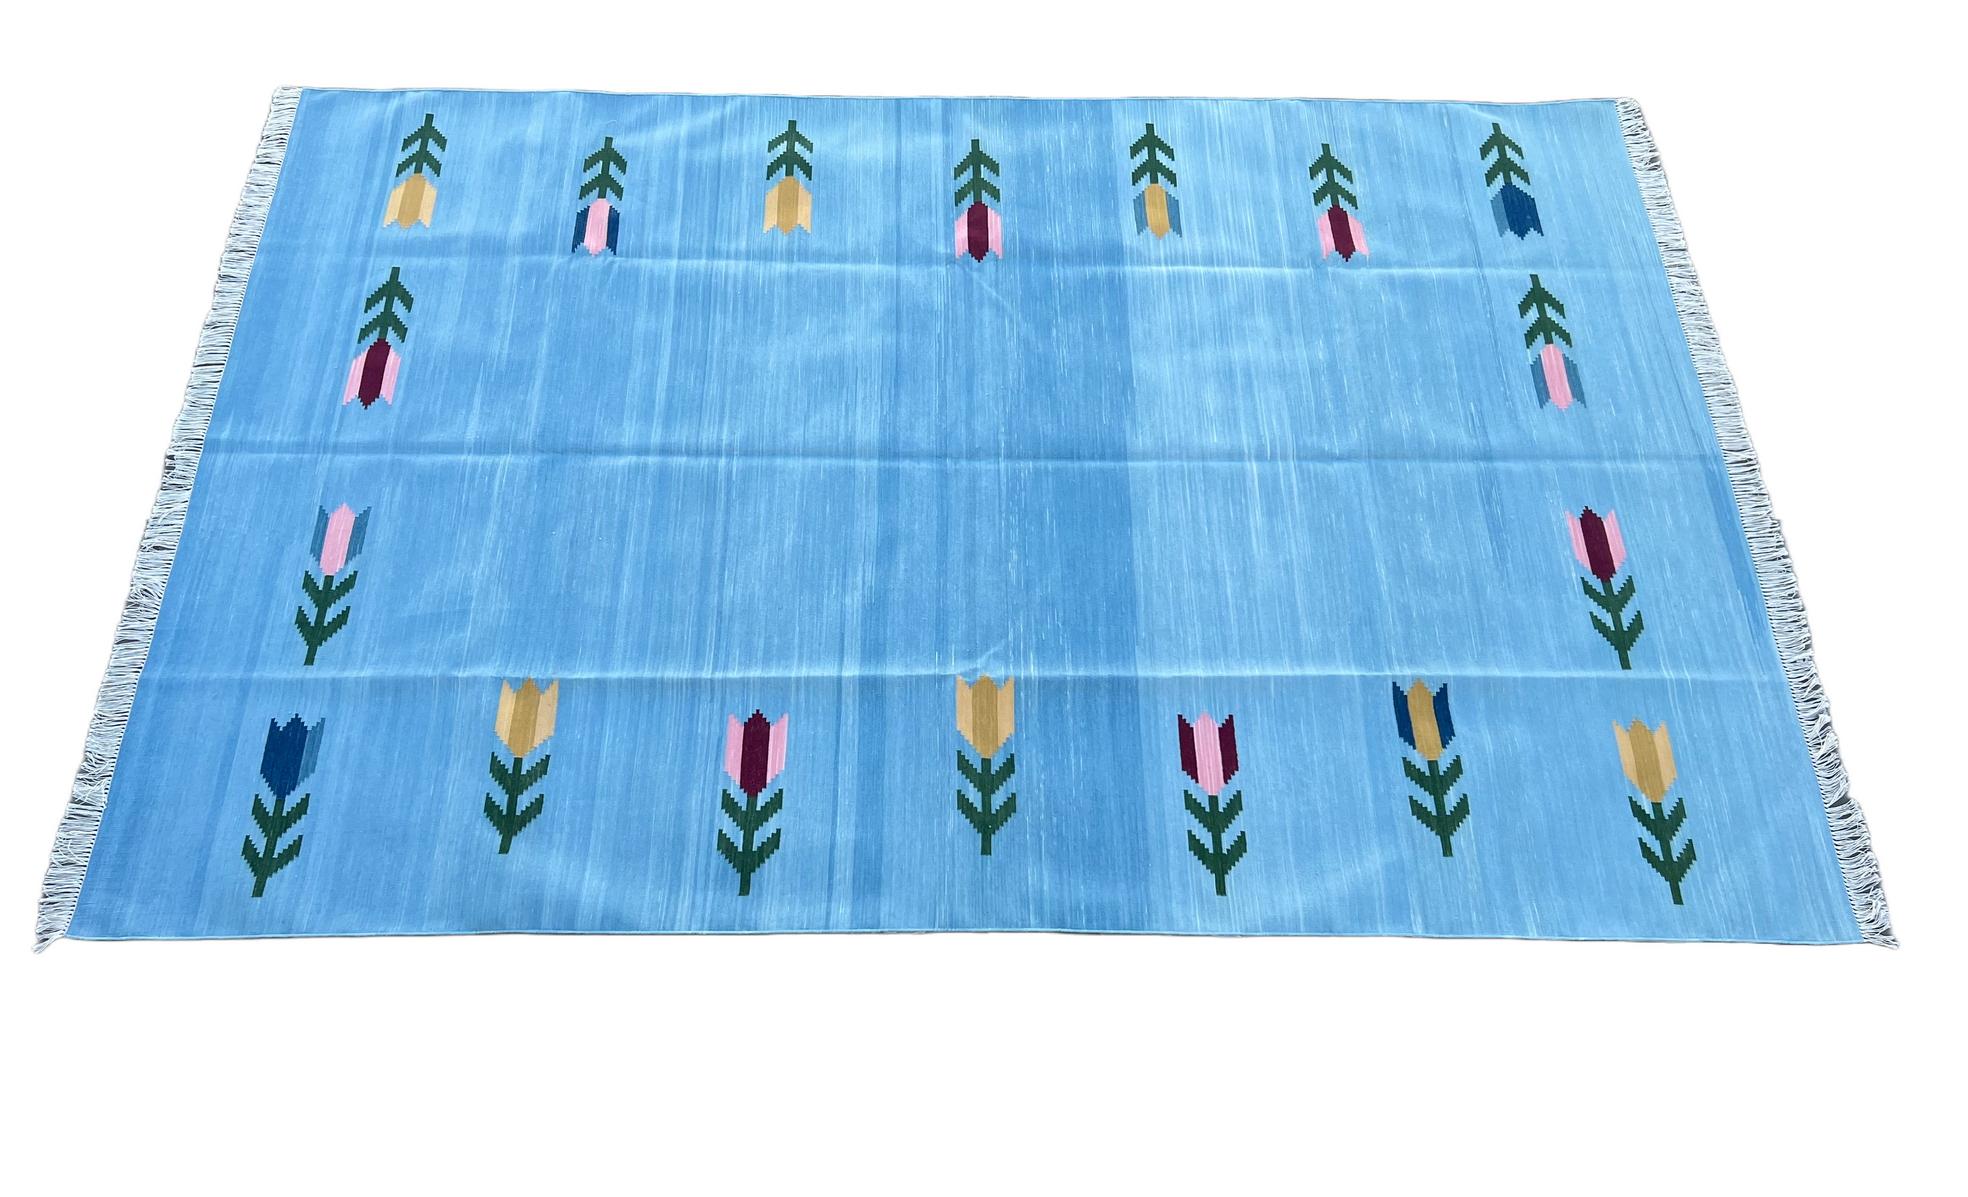 Mid-Century Modern Handmade Cotton Area Flat Weave Rug, Sky Blue & Red Leaf Pattern Indian Dhurrie For Sale